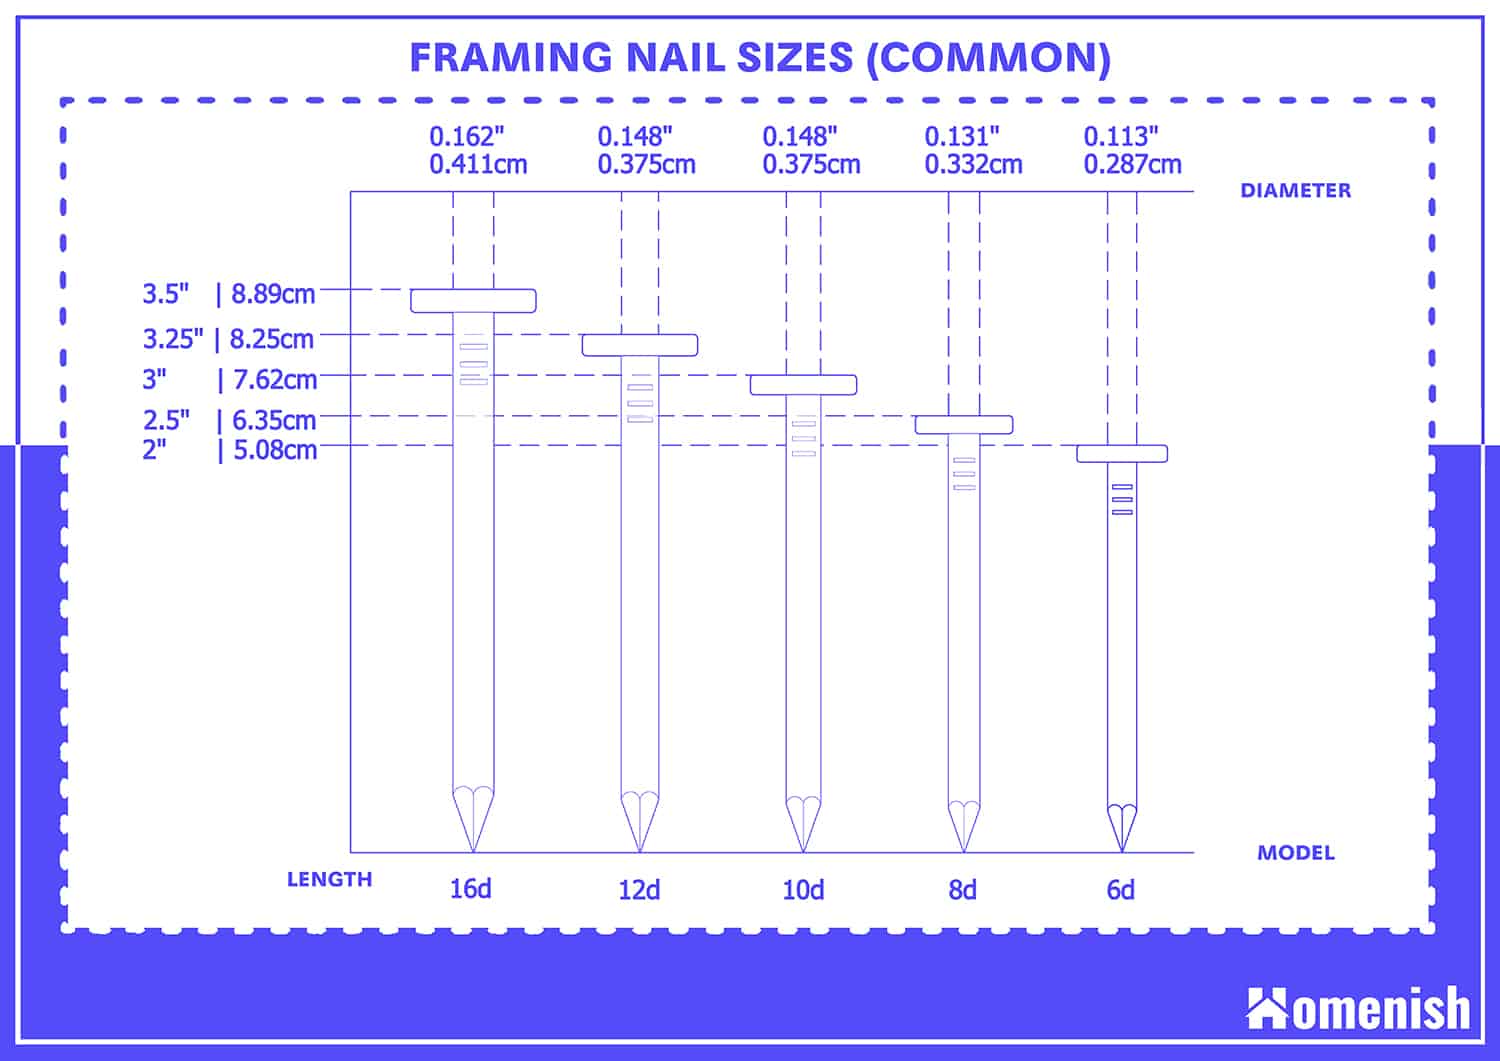 Common Nails and Their Sizes